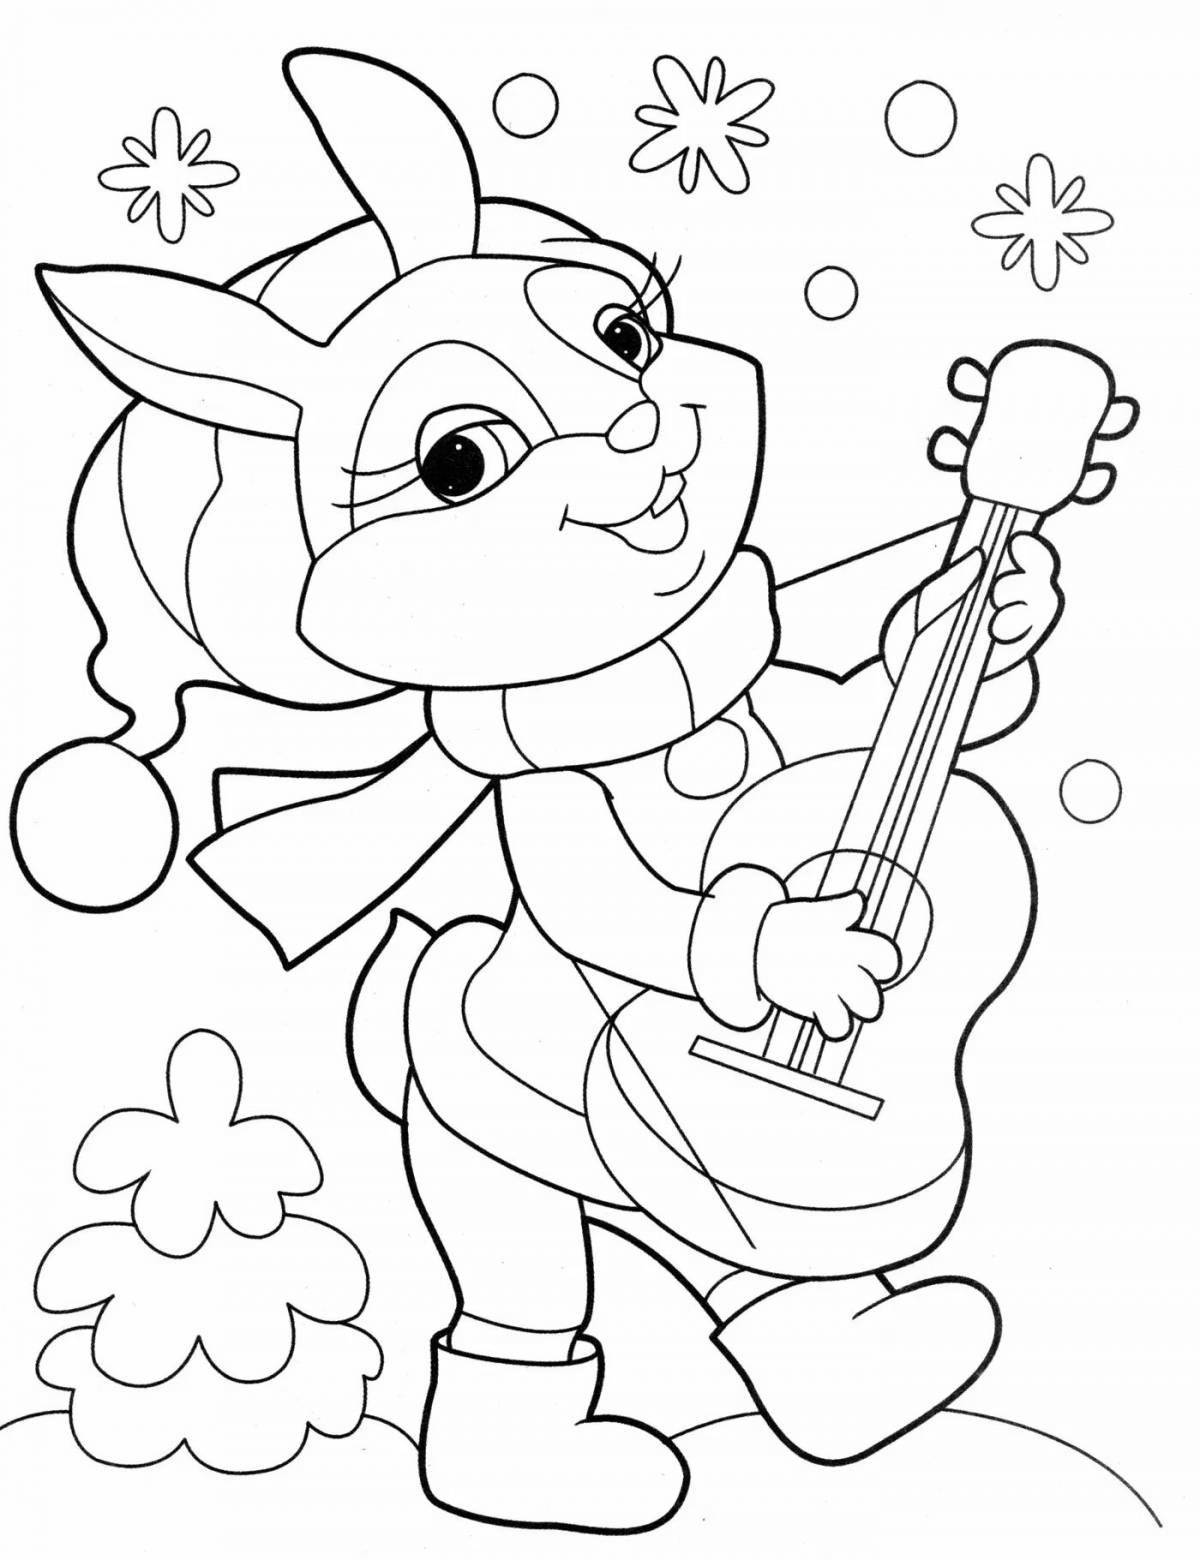 Color-frenzy coloring page bunny new year